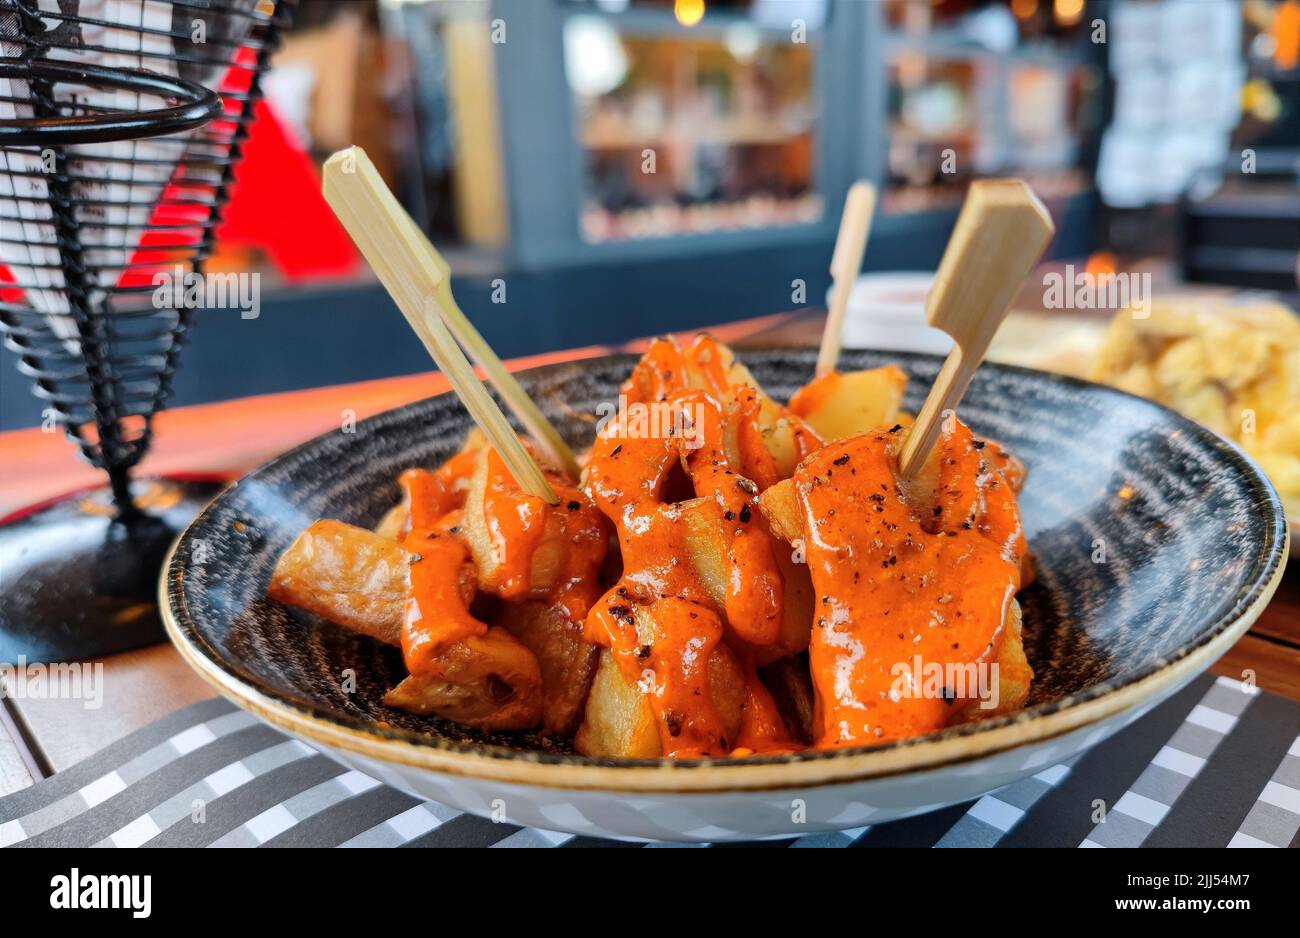 Delicious patatas bravas with spicy orange traditional sauce served on a black dish in a restaurant Stock Photo